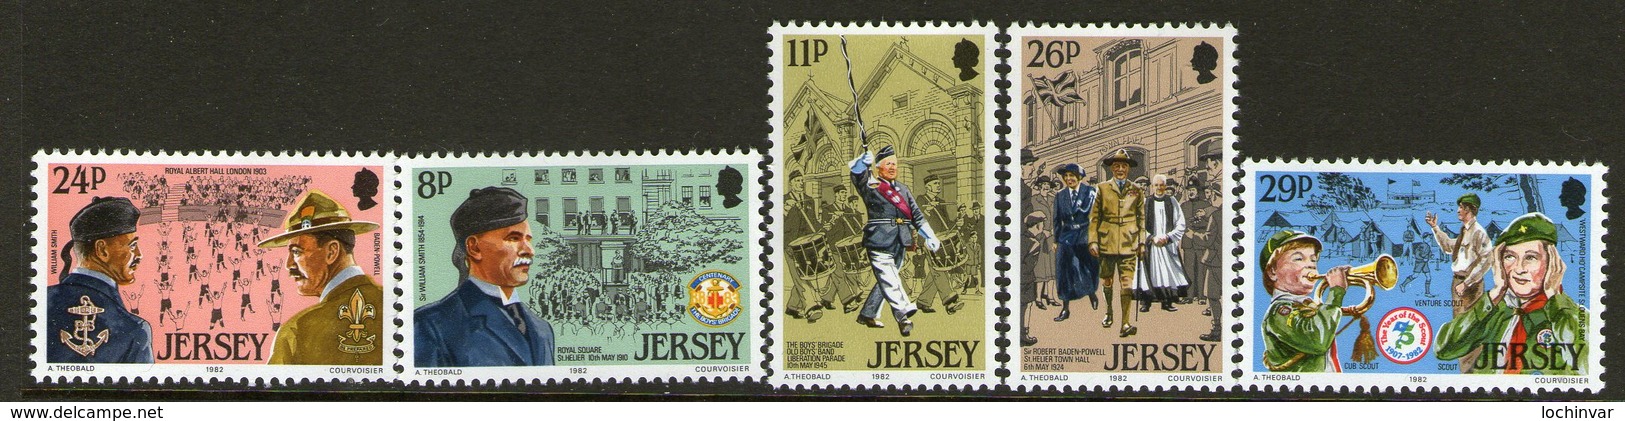 JERSEY, 1982 YOUTH ORGANISATIONS 5 MNH - Jersey